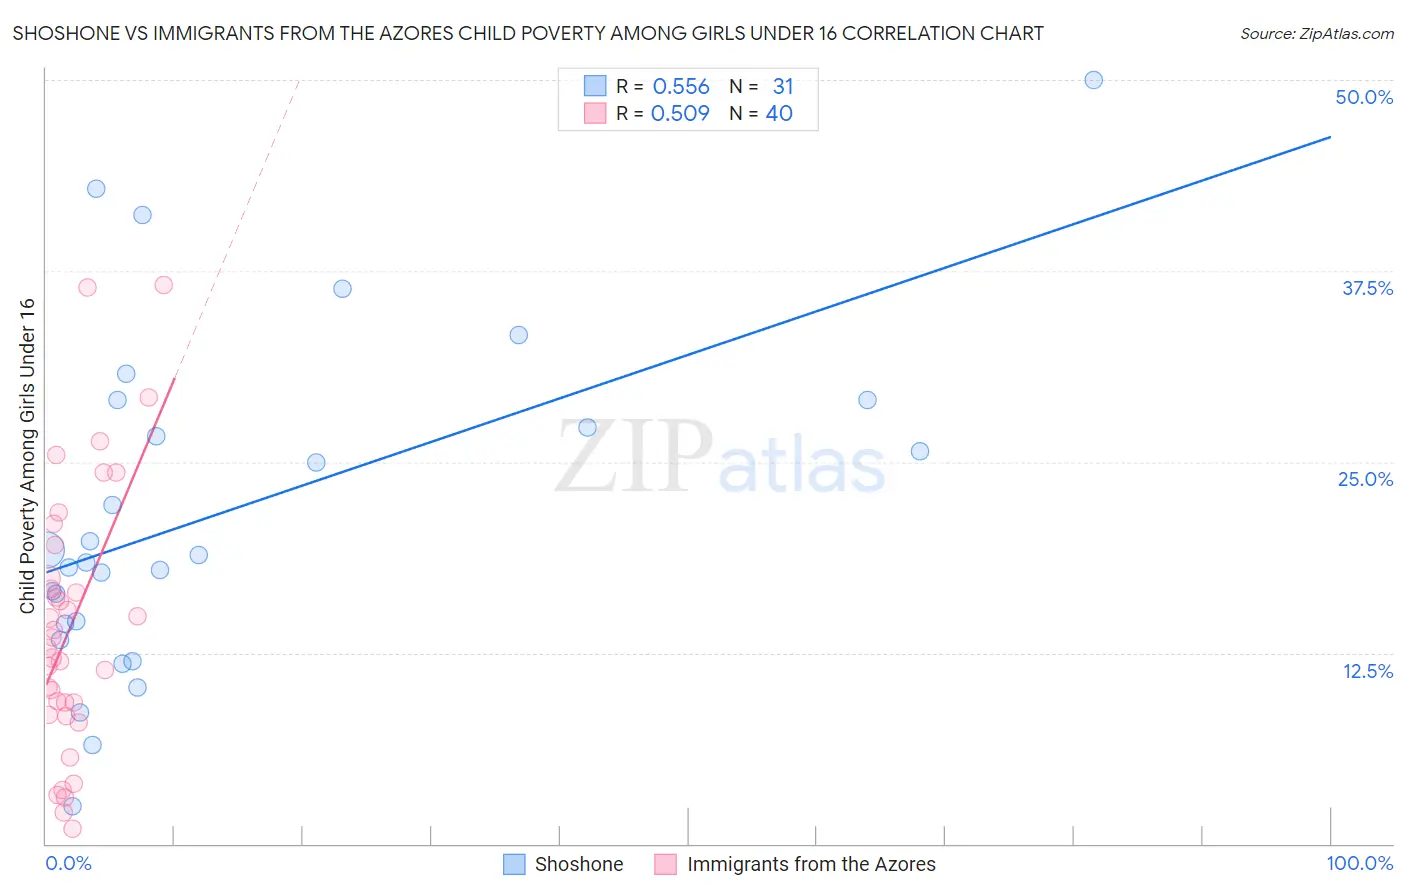 Shoshone vs Immigrants from the Azores Child Poverty Among Girls Under 16